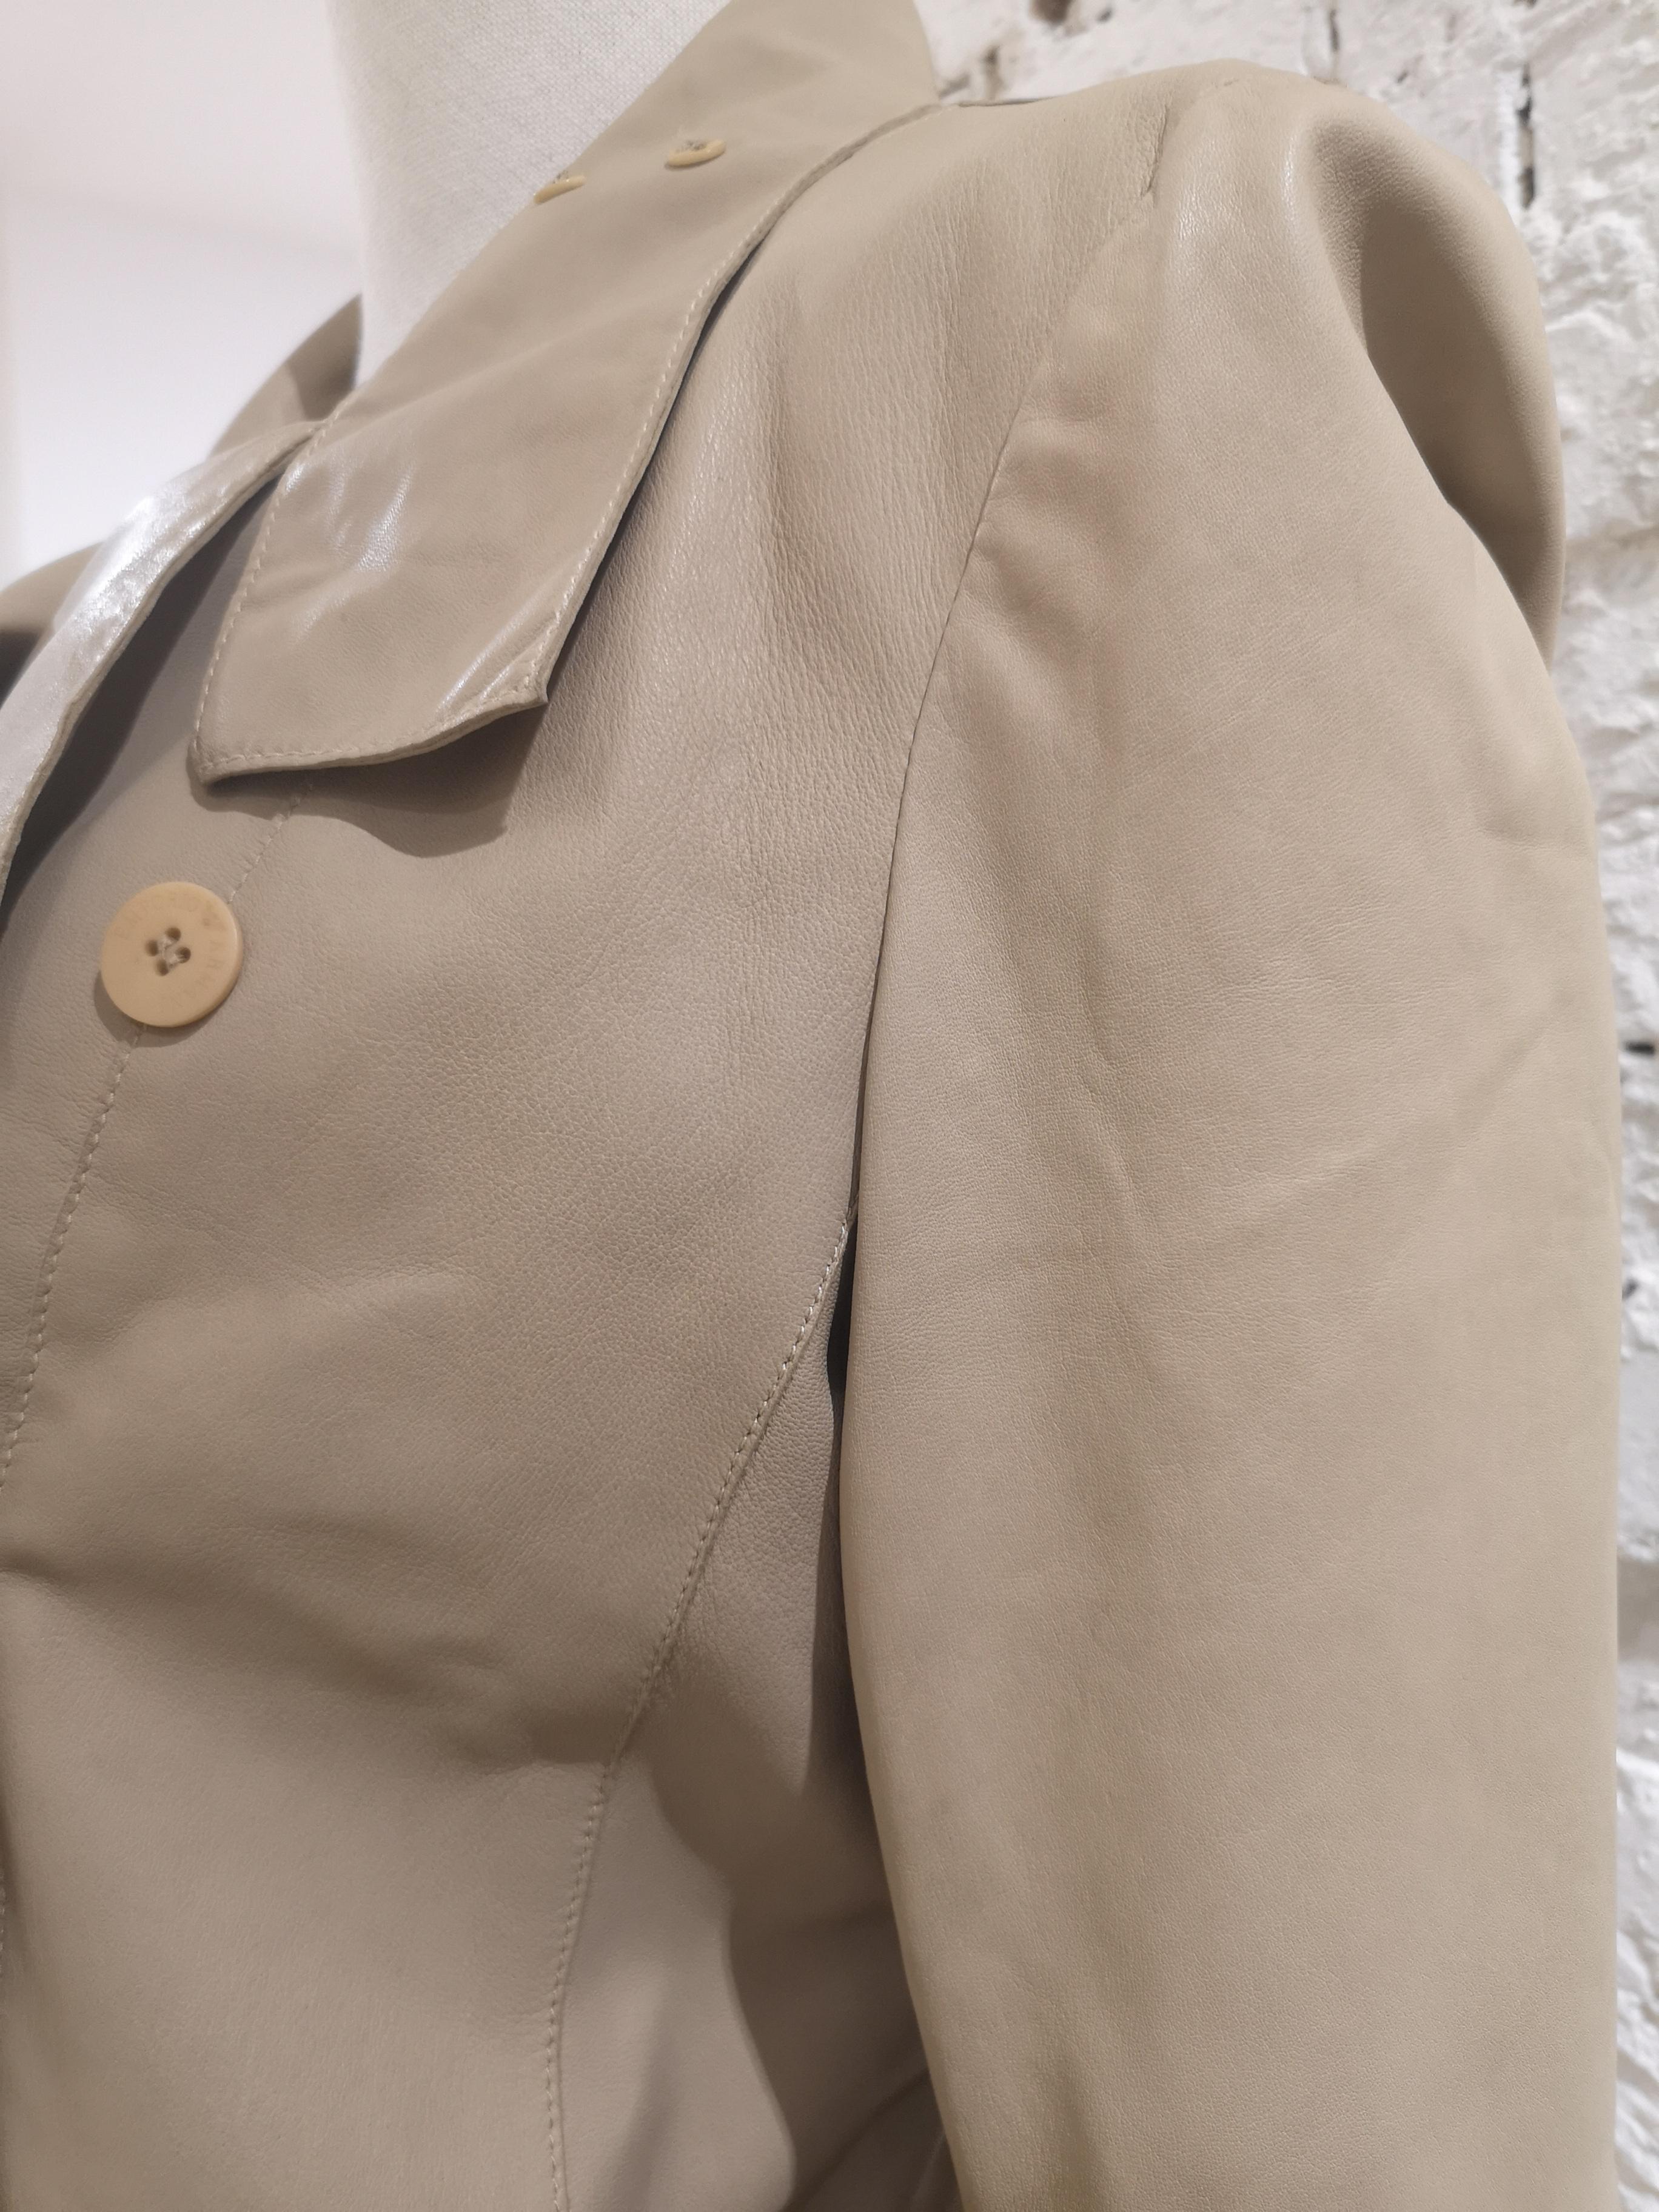 Giorgio Armani beige leather jacket
totally made in italy in size 44
total lenght 61 cm
shoulder to hem 71 cm